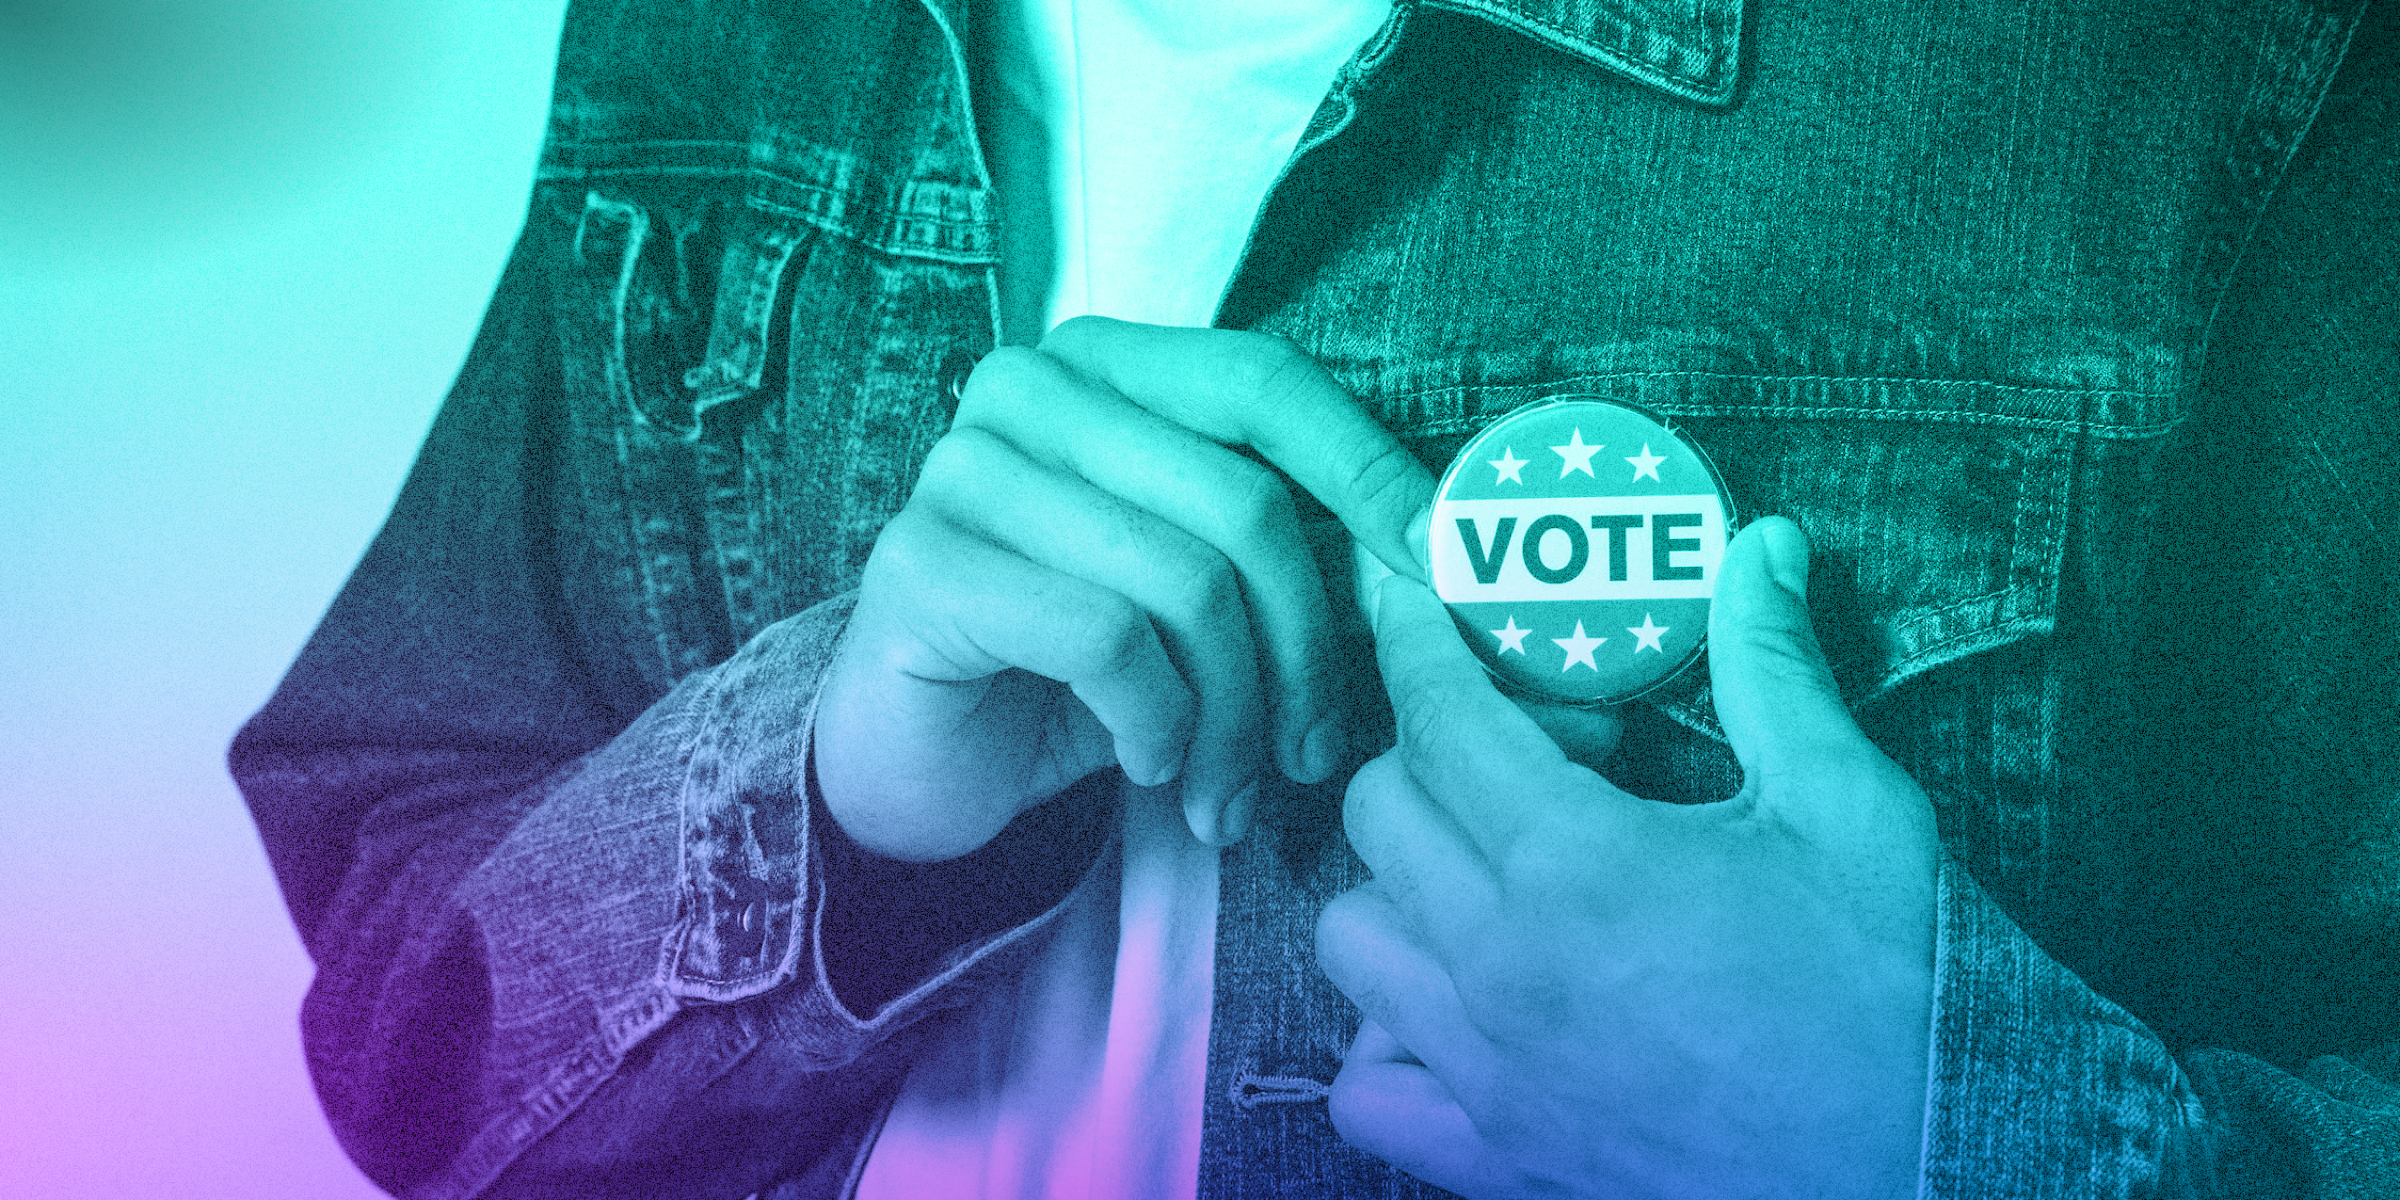 Zoomed into a person pinning a button that says "VOTE" on it to their jacket